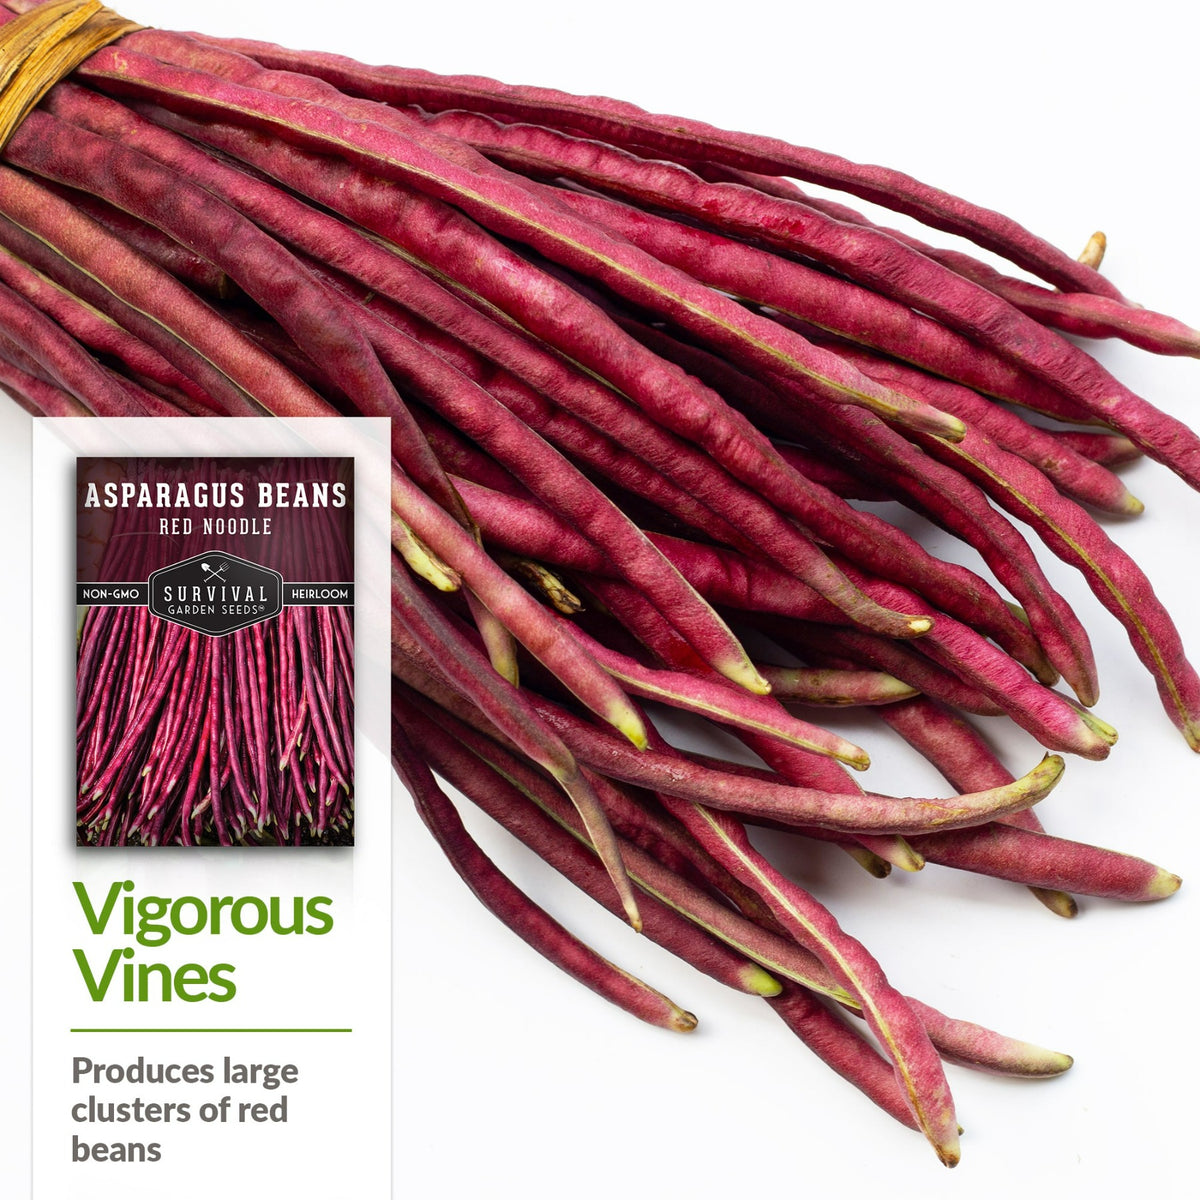 Red Noodle Asparagus Beans produce large clusters of red beans